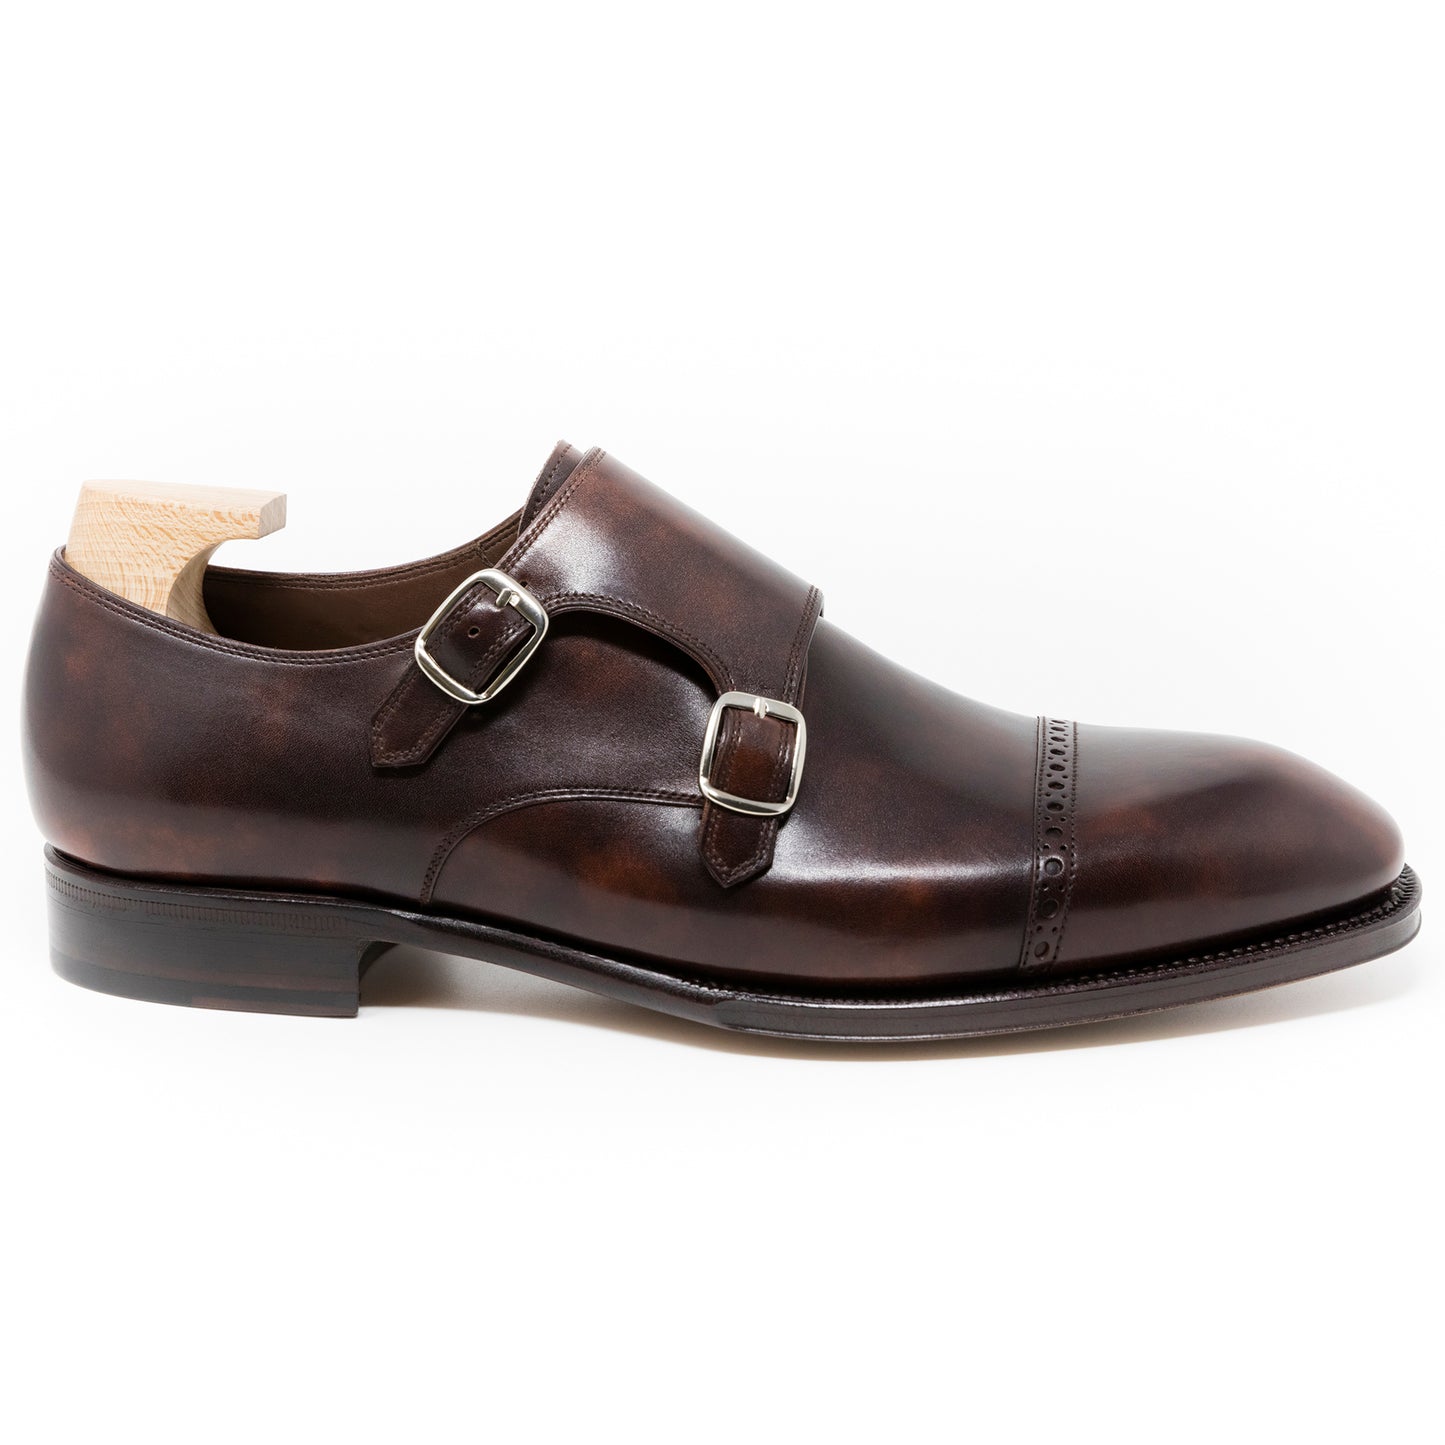 TLB Mallorca leather shoes 544 / ALAN / MUSEUM CALF BROWN